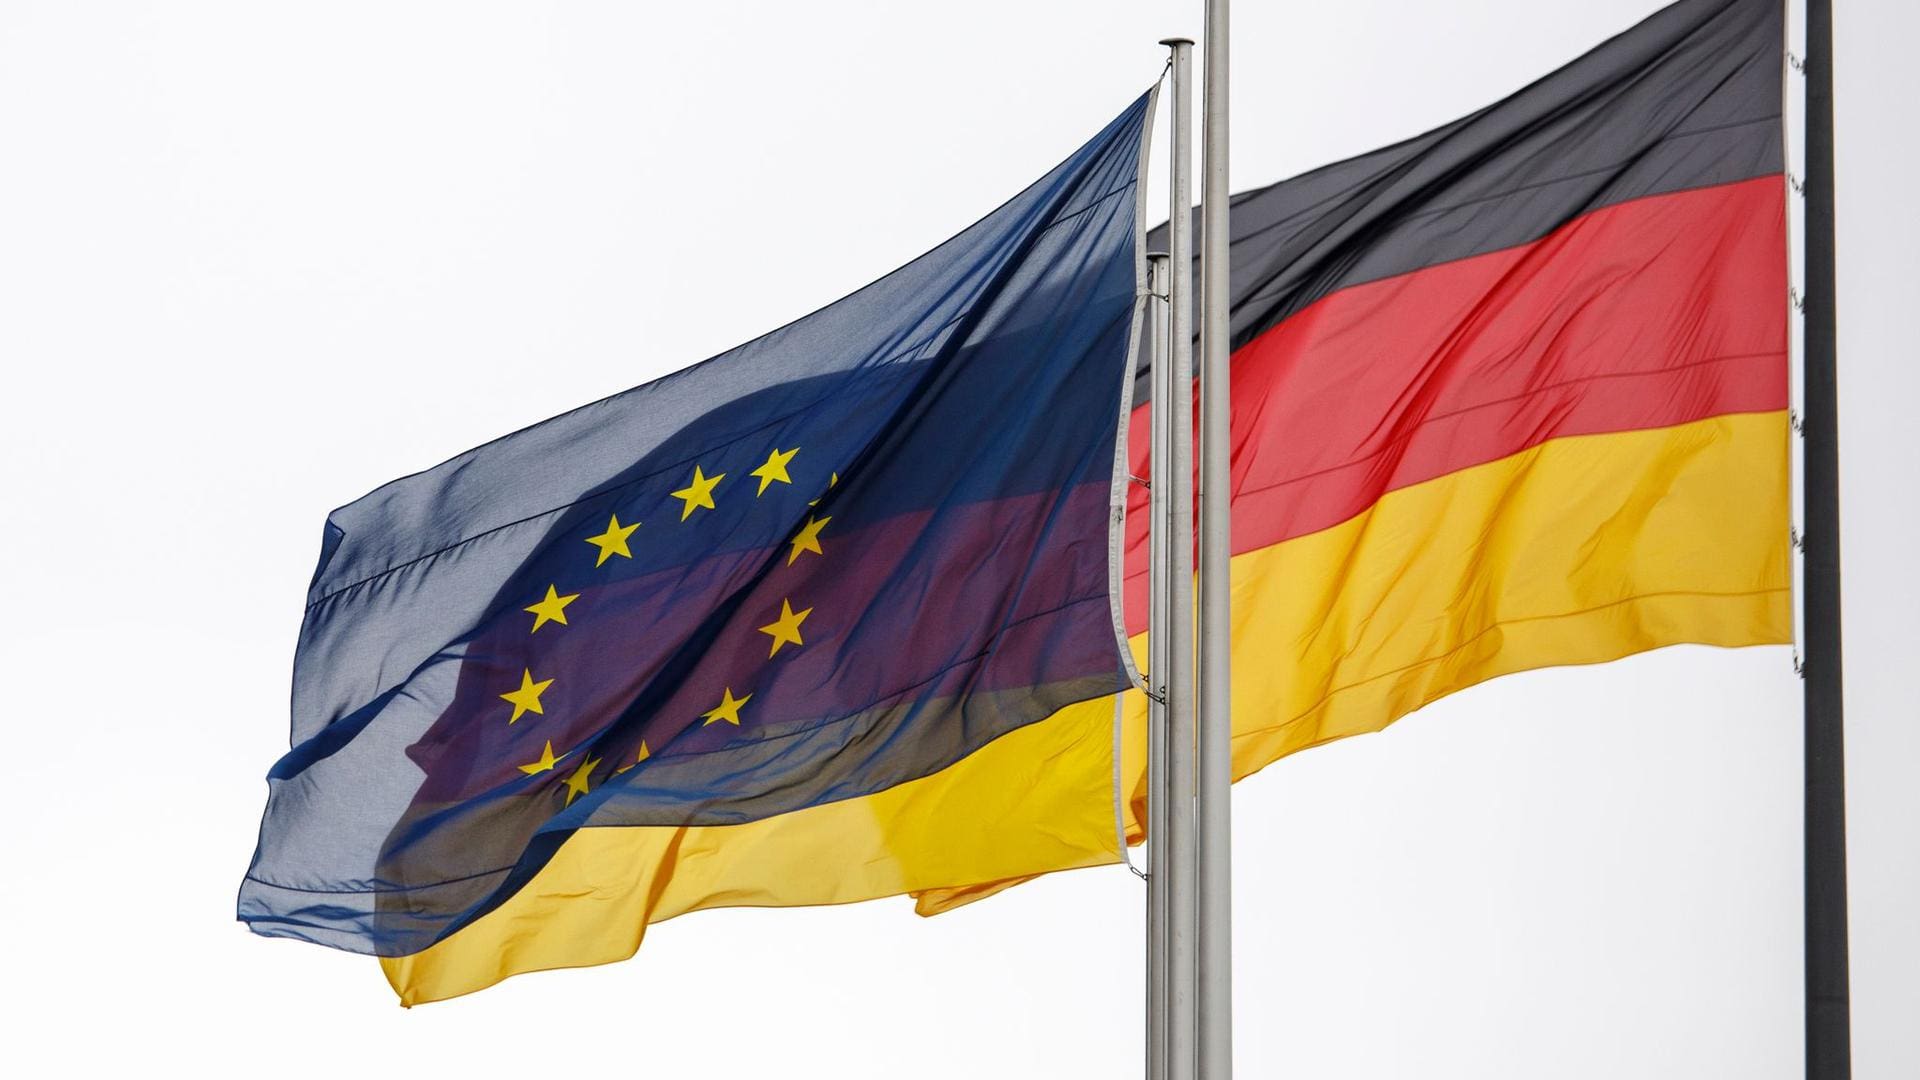 Germany, the leading power of the EU?